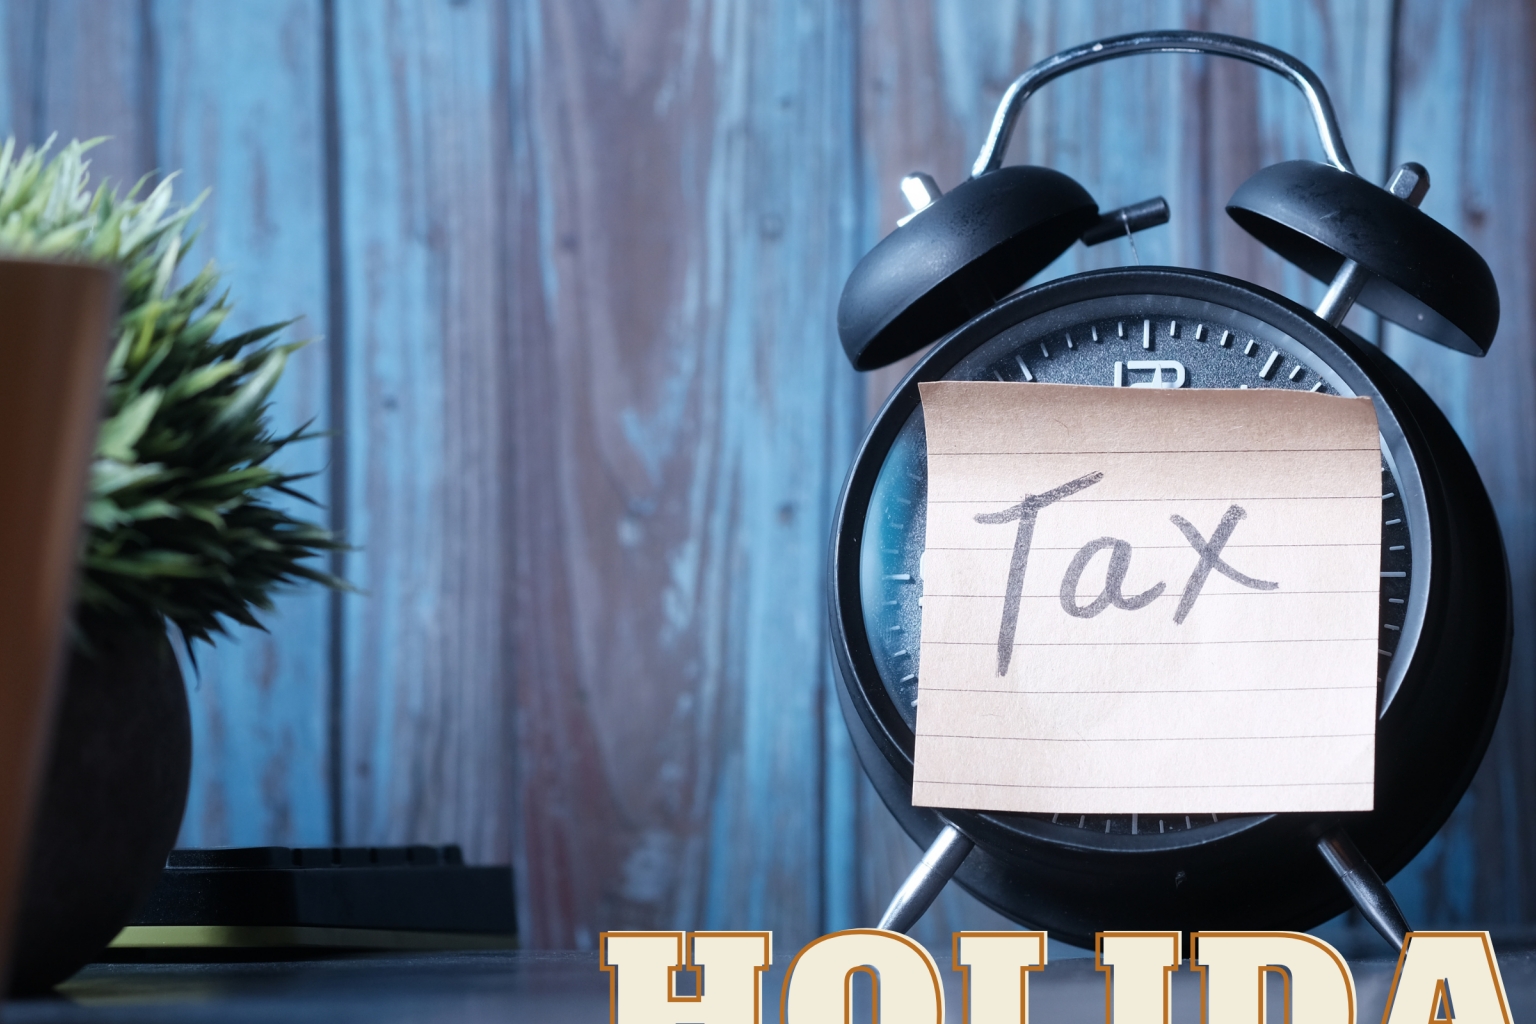 When Will 2021 Tax Holiday Be?